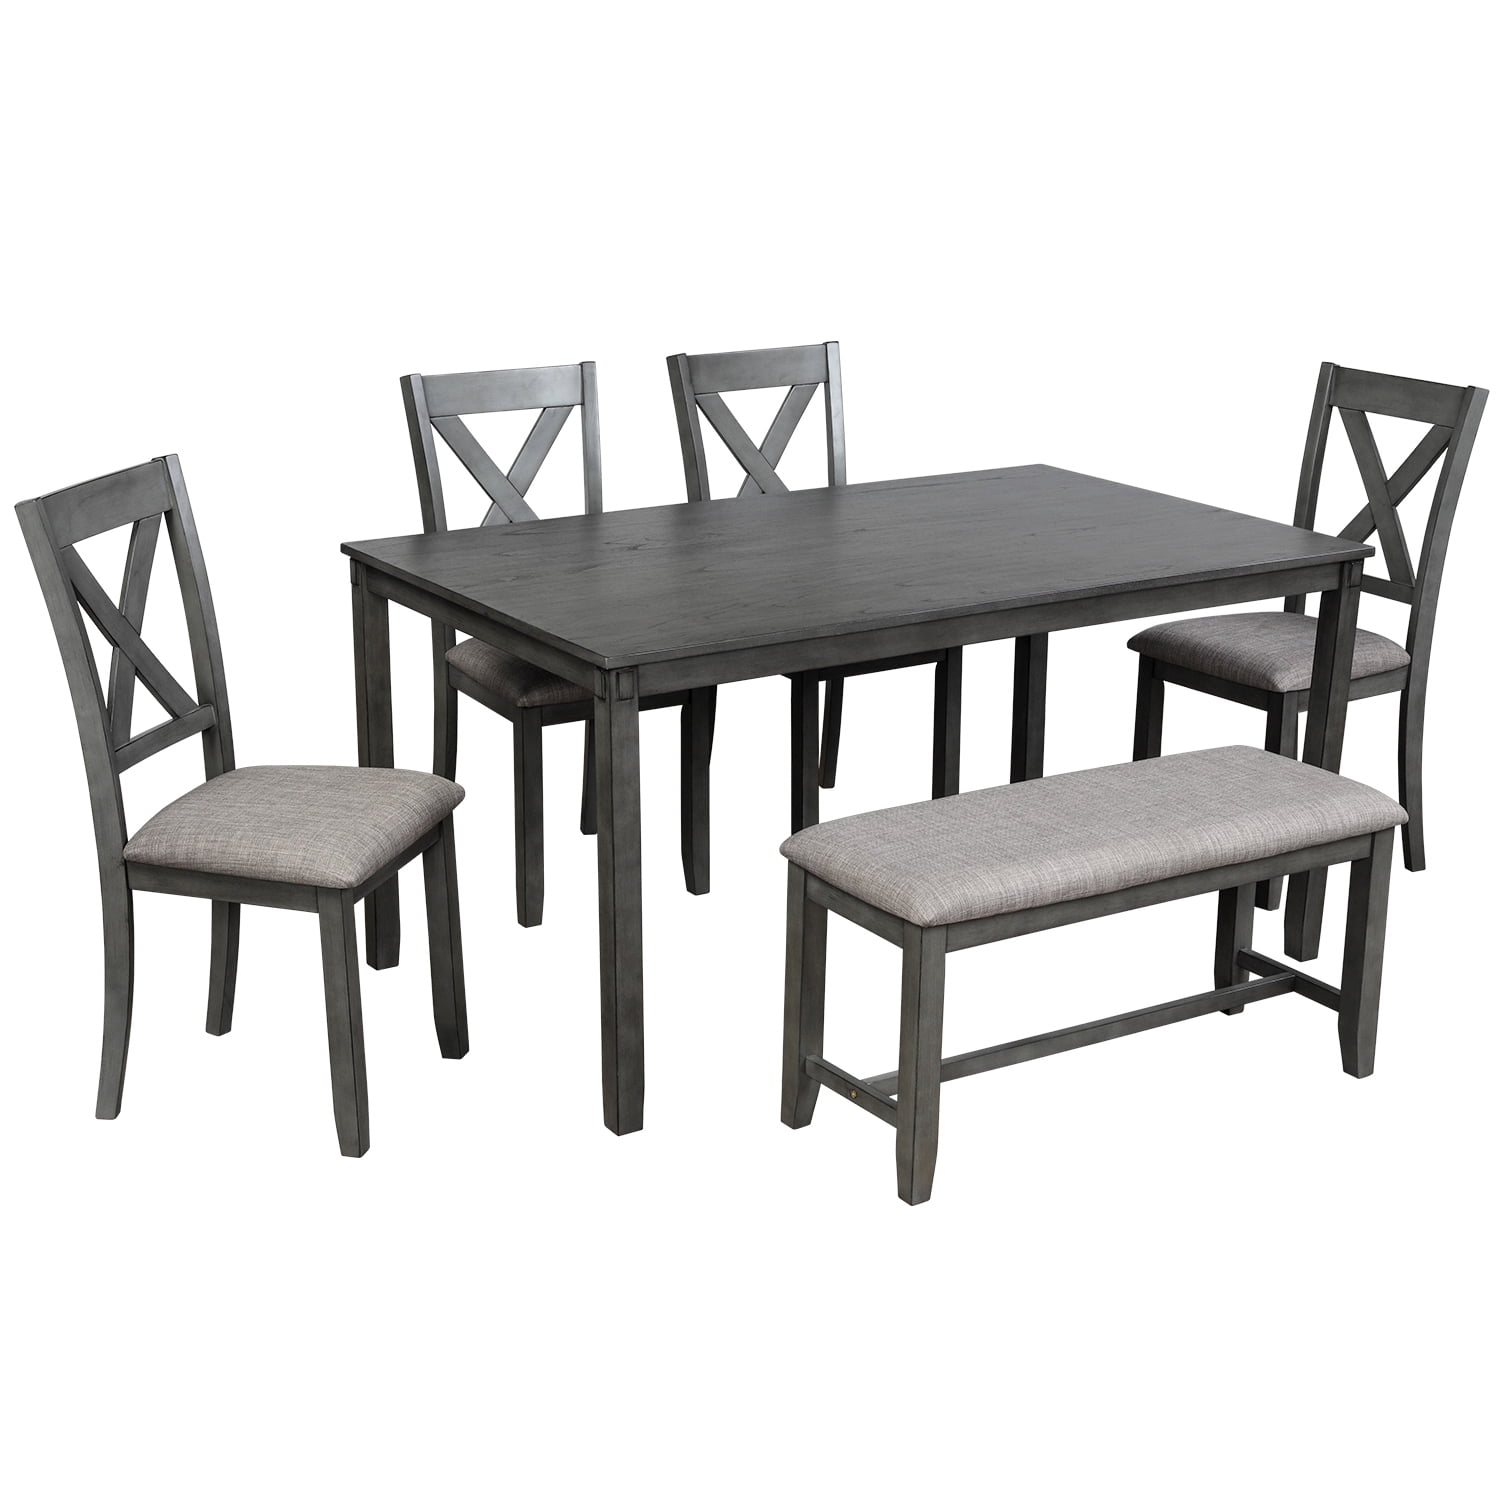 Owsoo 6 Piece Kitchen Dining Table Set Wooden Rectangular Dining Table